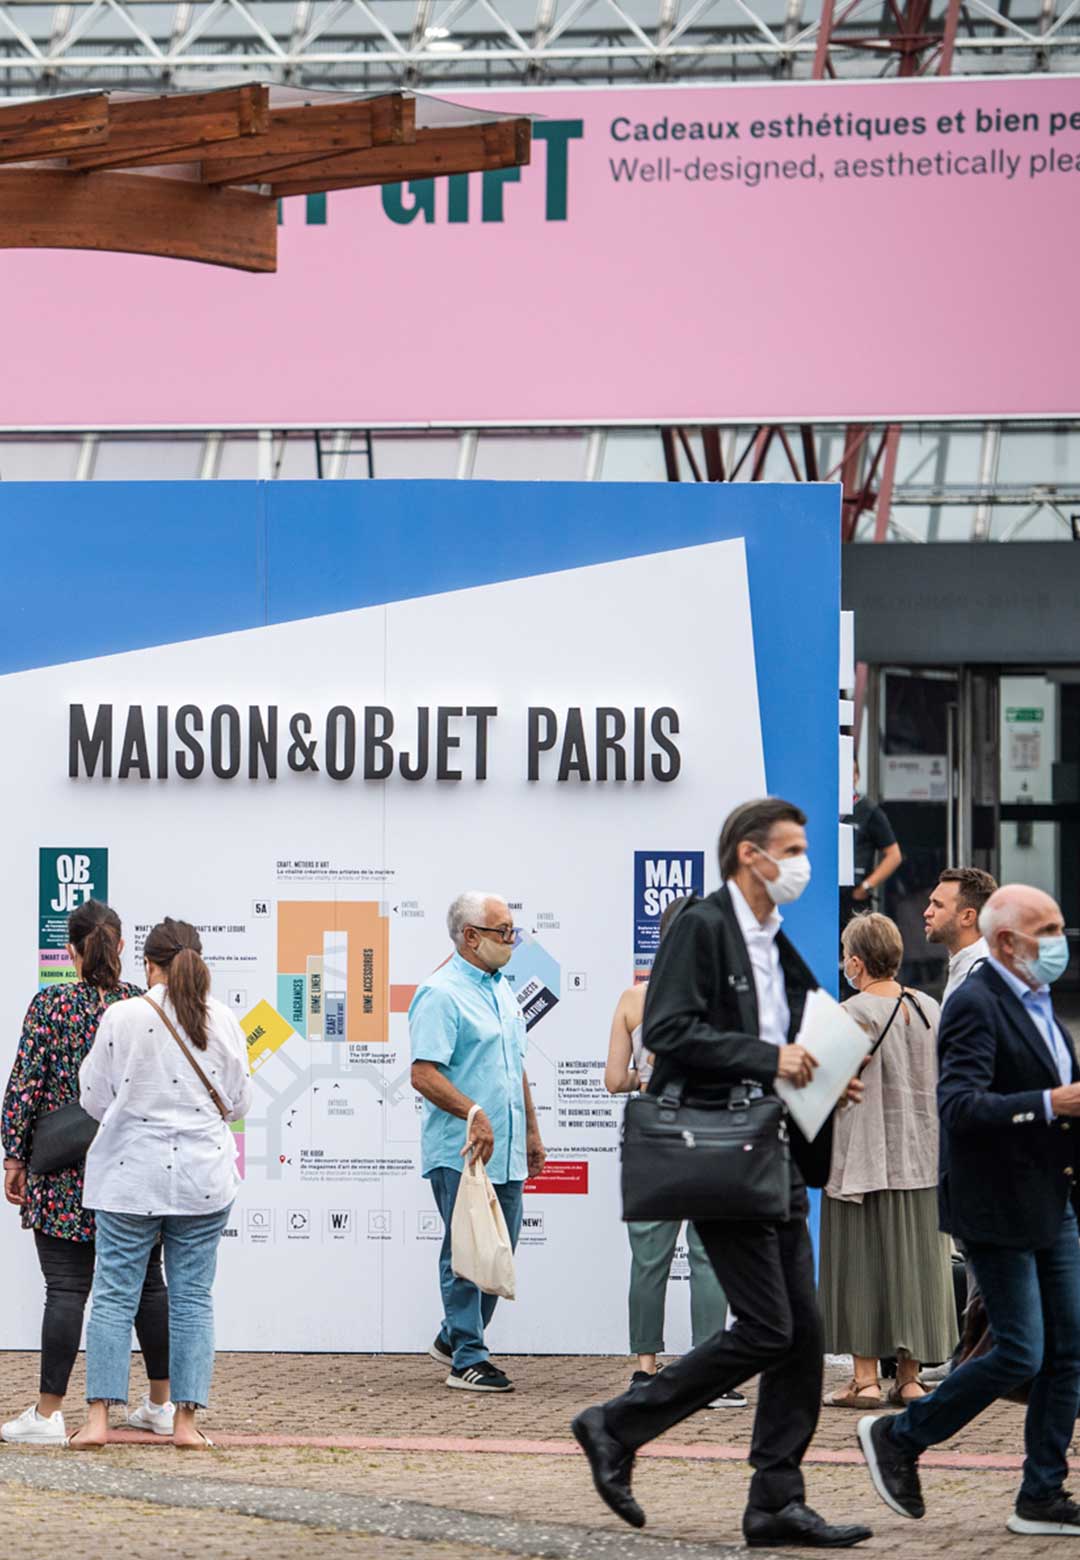 Maison&Objet 2022 rescheduled in view of COVID-19 surge